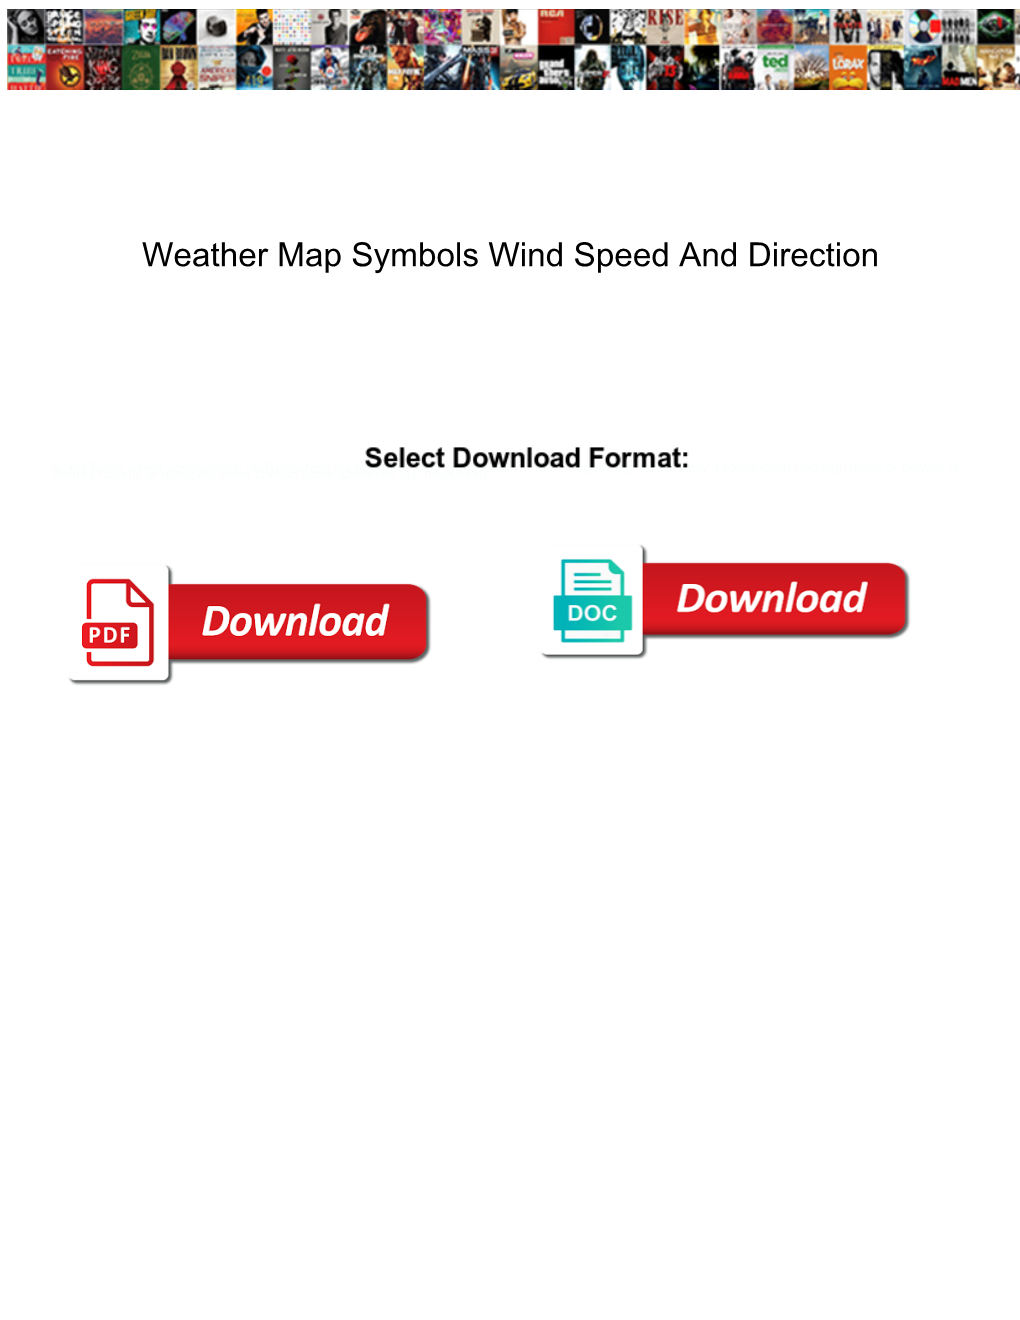 Weather Map Symbols Wind Speed and Direction